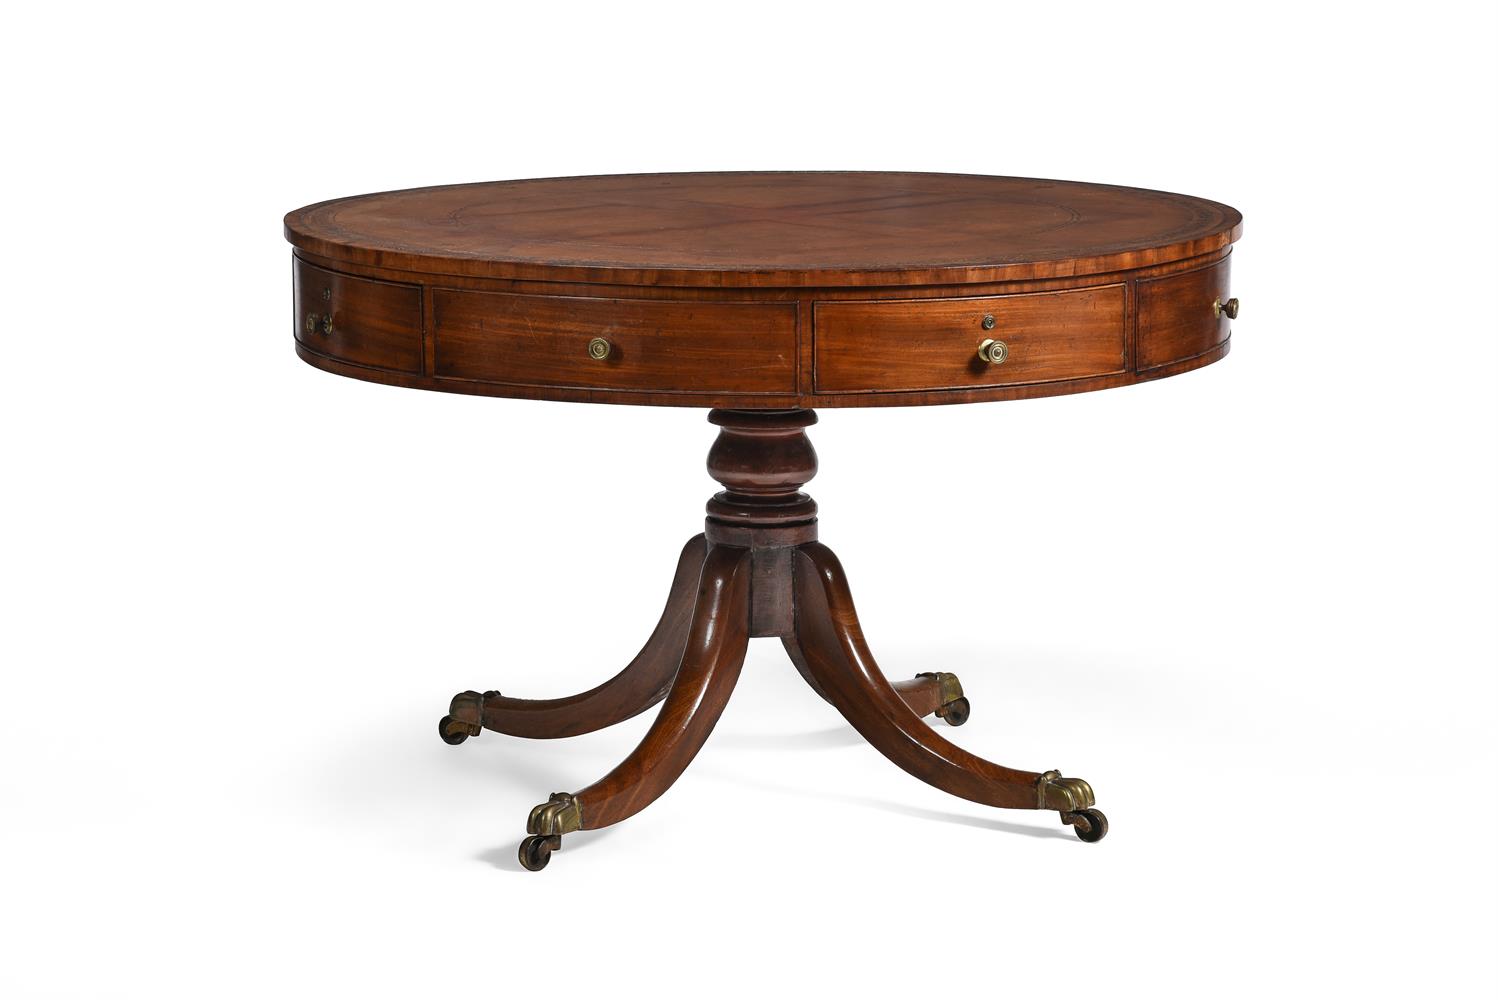 A GEORGE IV MAHOGANY DRUM LIBRARY TABLE